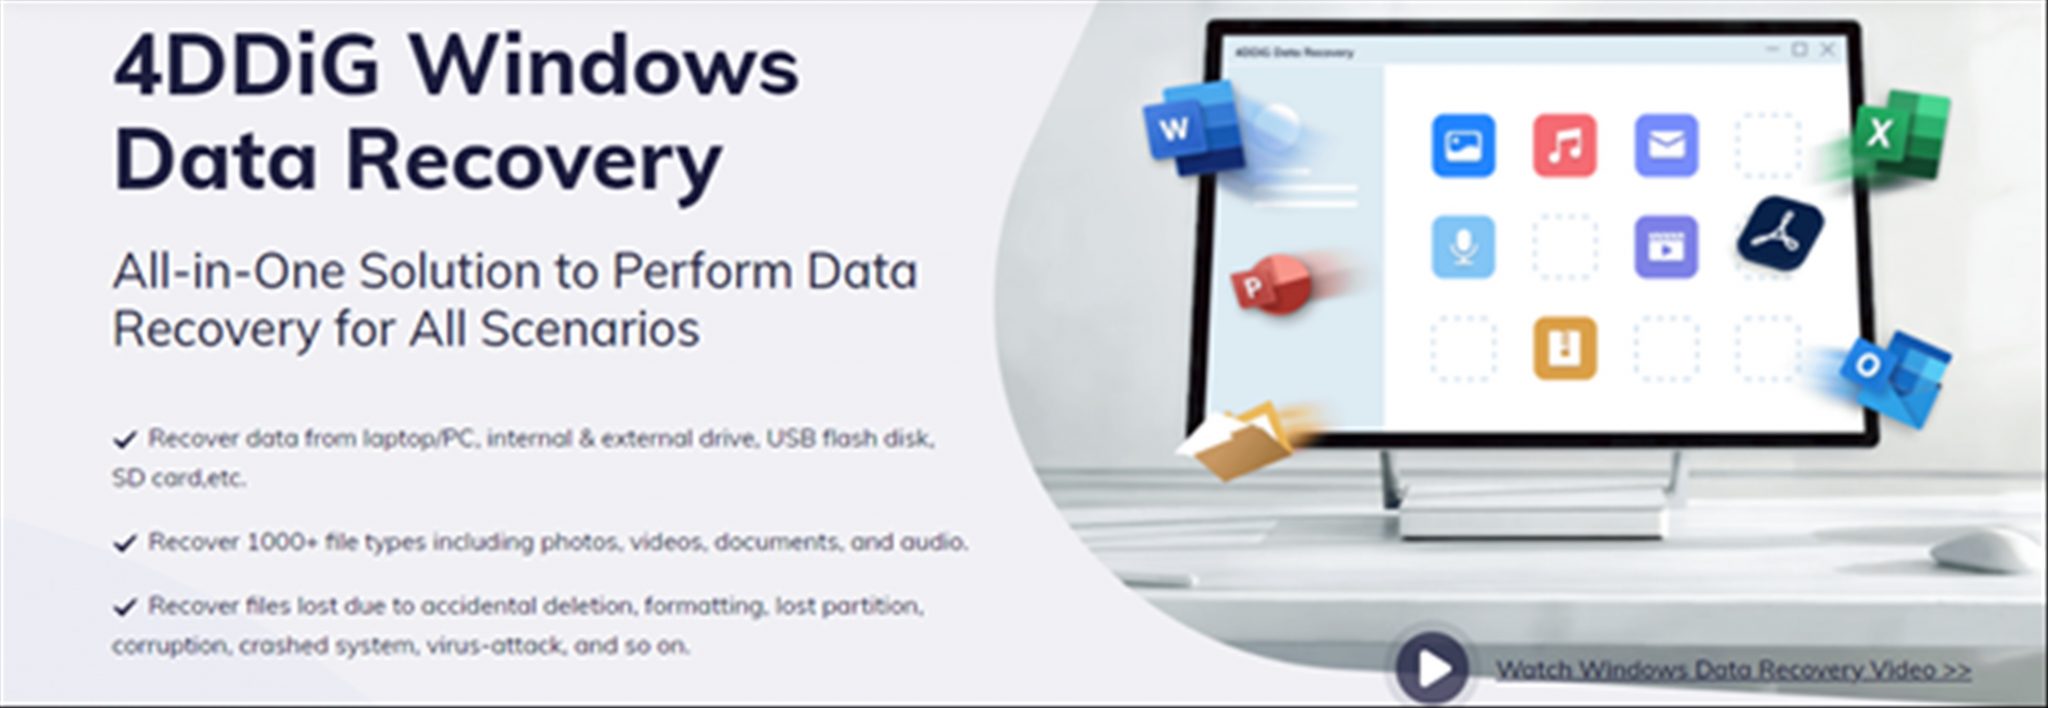 tenorshare 4ddig for windows data recovery crack